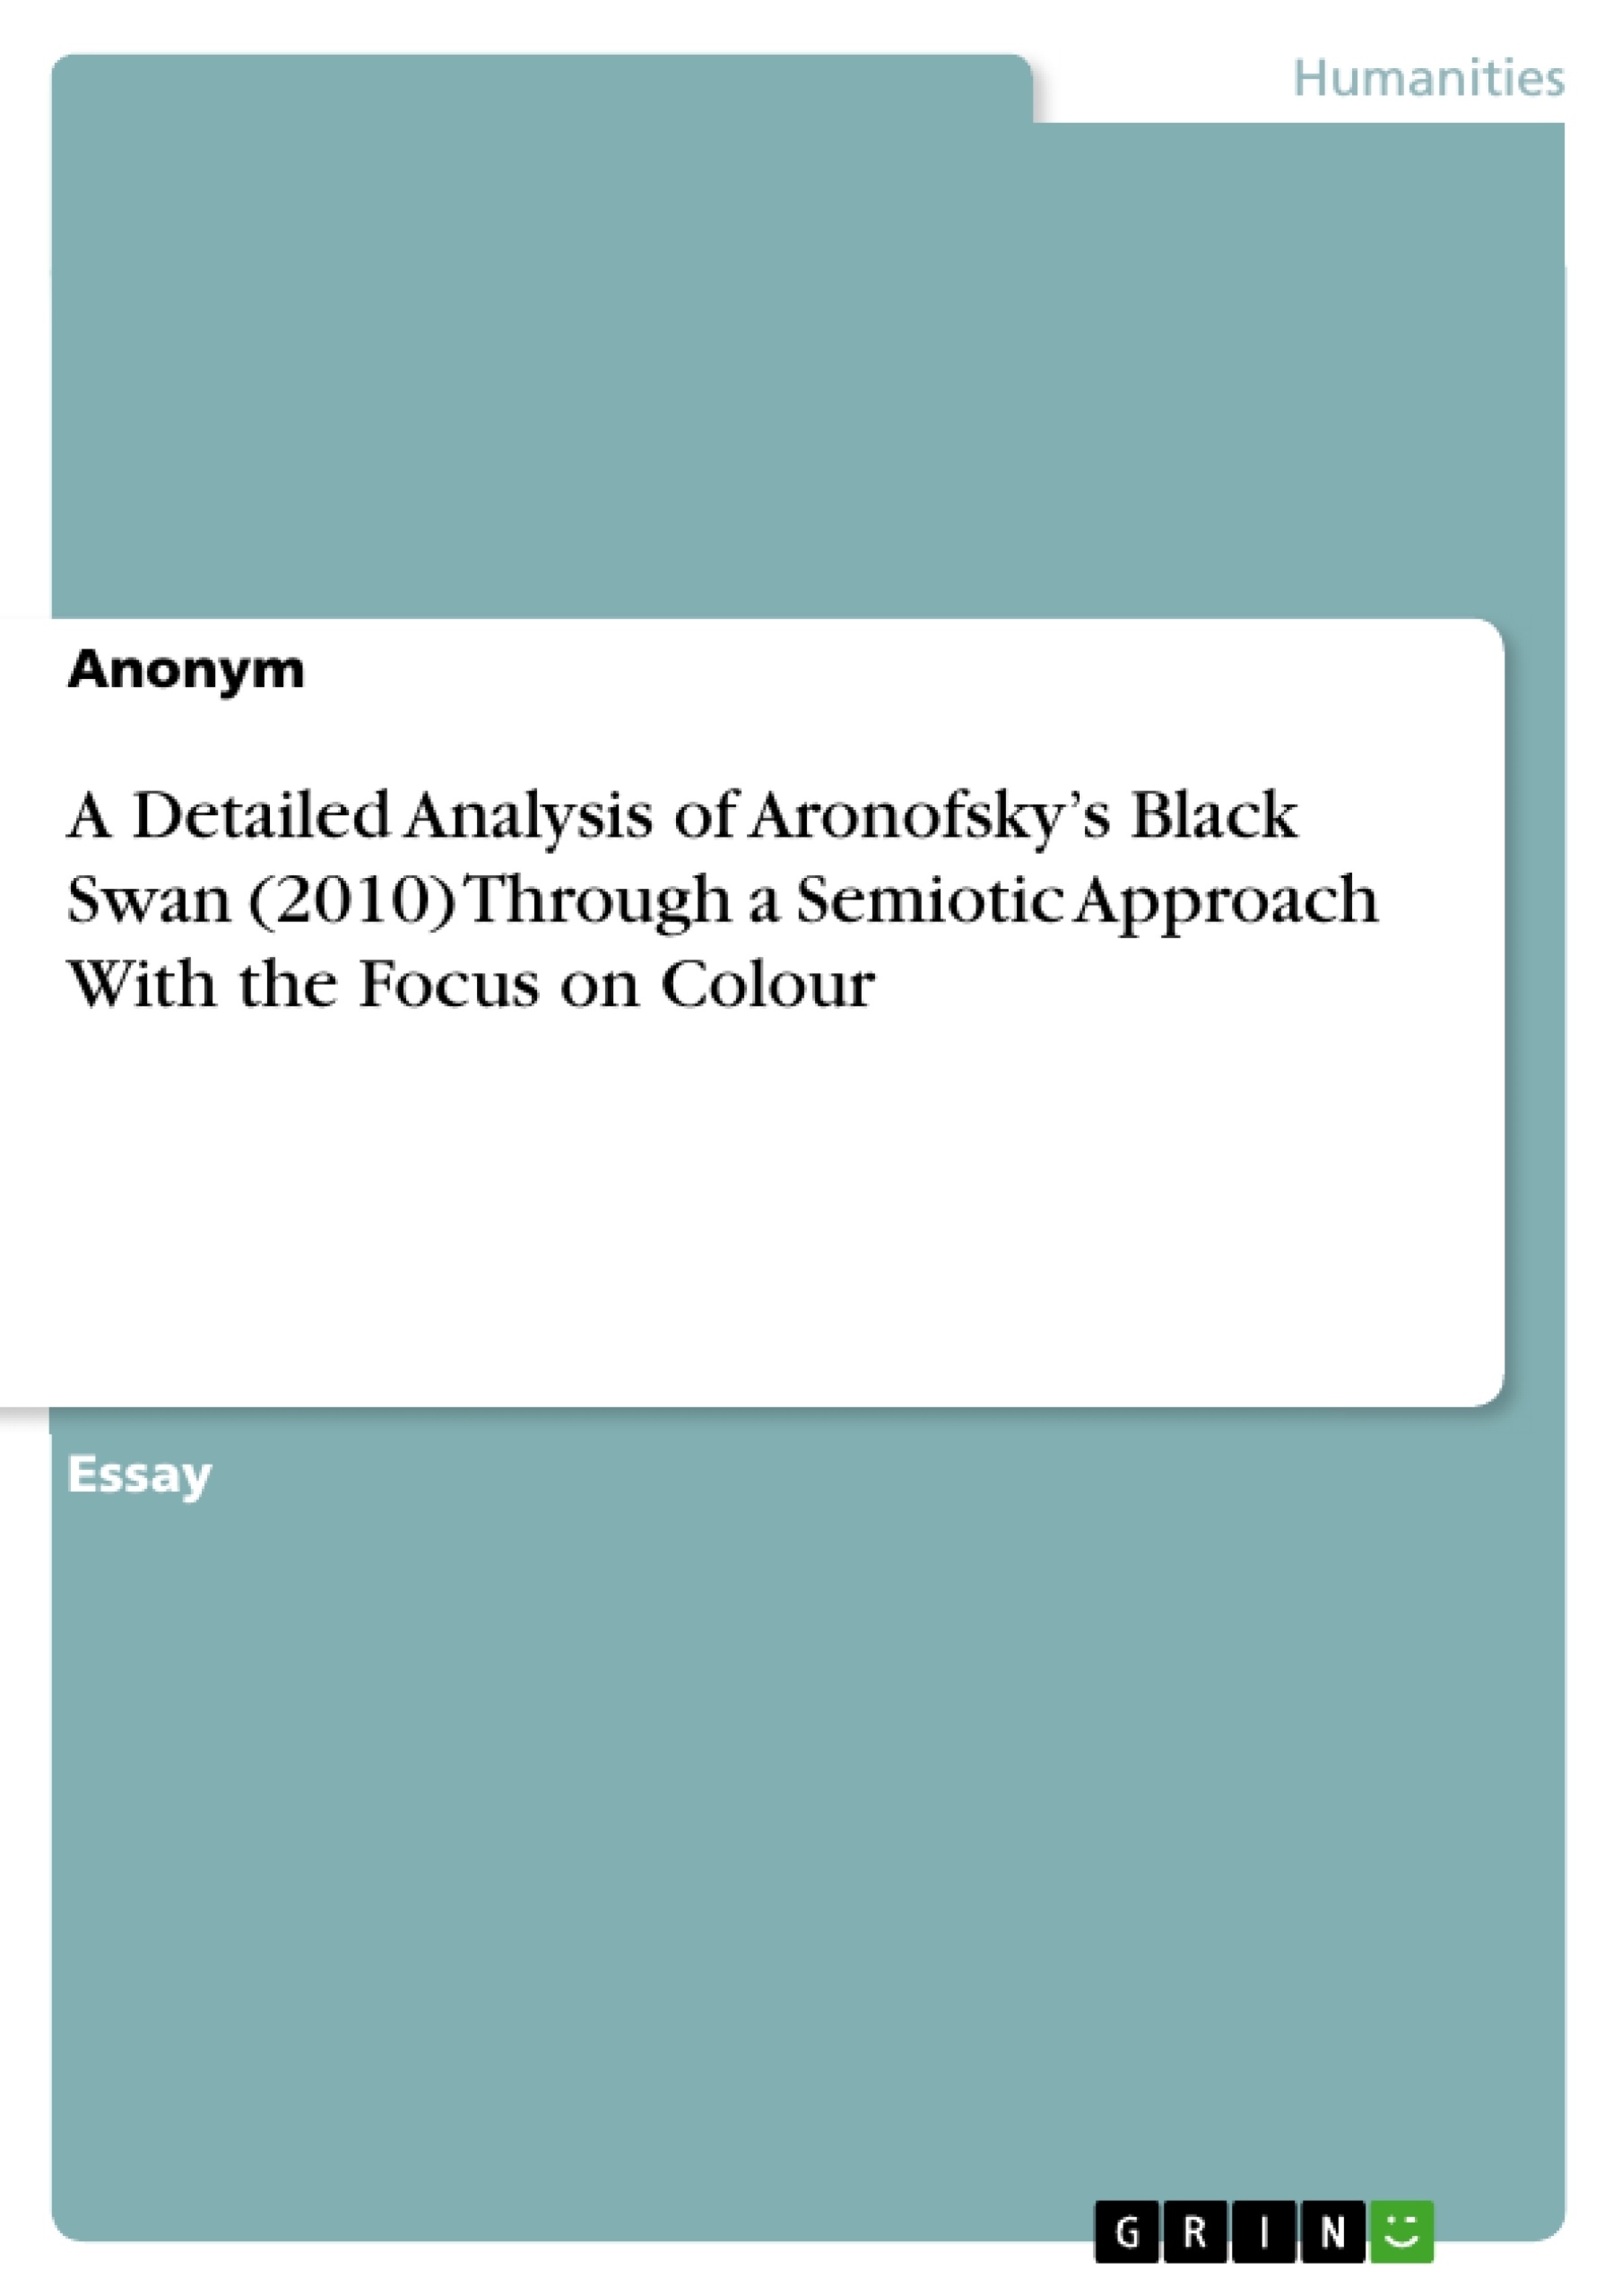 Título: A Detailed Analysis of Aronofsky’s Black Swan (2010) Through a Semiotic Approach With the Focus on Colour